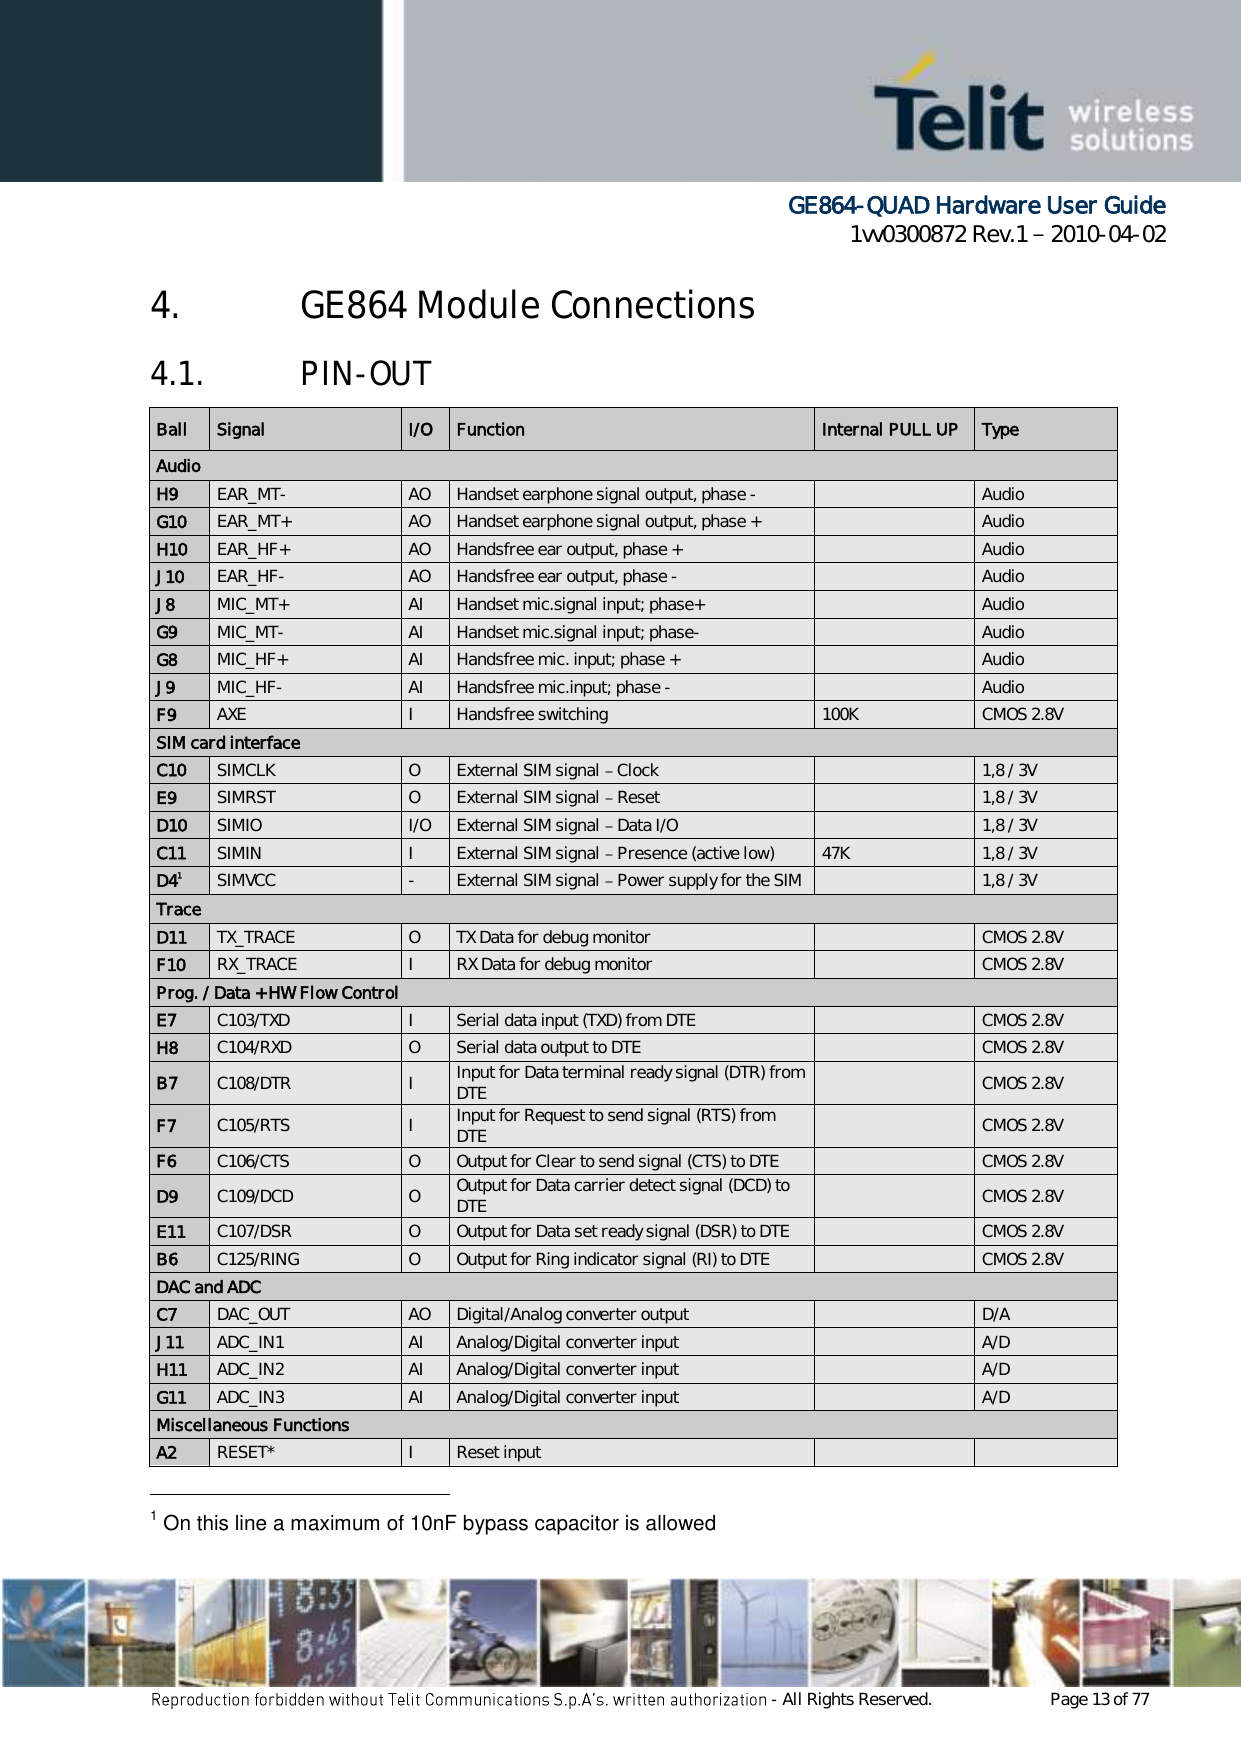      GE864-QUAD Hardware User Guide 1vv0300872 Rev.1   2010-04-02 - All Rights Reserved.    Page 13 of 77  4. GE864 Module Connections 4.1. PIN-OUT Ball Signal I/O Function Internal PULL UP Type Audio H9 EAR_MT- AO Handset earphone signal output, phase -  Audio G10 EAR_MT+ AO Handset earphone signal output, phase +  Audio H10 EAR_HF+ AO Handsfree ear output, phase +  Audio J10 EAR_HF- AO Handsfree ear output, phase -  Audio J8 MIC_MT+ AI Handset mic.signal input; phase+  Audio G9 MIC_MT- AI Handset mic.signal input; phase-  Audio G8 MIC_HF+ AI Handsfree mic. input; phase +  Audio J9 MIC_HF- AI Handsfree mic.input; phase -  Audio F9 AXE I Handsfree switching  100K CMOS 2.8V SIM card interface C10 SIMCLK O External SIM signal   Clock  1,8 / 3V E9 SIMRST O External SIM signal   Reset  1,8 / 3V D10 SIMIO I/O External SIM signal   Data I/O  1,8 / 3V C11 SIMIN I External SIM signal   Presence (active low) 47K 1,8 / 3V D41 SIMVCC - External SIM signal   Power supply for the SIM  1,8 / 3V Trace D11 TX_TRACE O TX Data for debug monitor   CMOS 2.8V F10 RX_TRACE I RX Data for debug monitor   CMOS 2.8V Prog. / Data + HW Flow Control E7 C103/TXD I Serial data input (TXD) from DTE   CMOS 2.8V H8 C104/RXD O Serial data output to DTE   CMOS 2.8V B7 C108/DTR I Input for Data terminal ready signal (DTR) from DTE   CMOS 2.8V F7 C105/RTS I Input for Request to send signal (RTS) from DTE   CMOS 2.8V F6 C106/CTS O Output for Clear to send signal (CTS) to DTE   CMOS 2.8V D9 C109/DCD O Output for Data carrier detect signal (DCD) to DTE   CMOS 2.8V E11 C107/DSR O Output for Data set ready signal (DSR) to DTE   CMOS 2.8V B6 C125/RING O Output for Ring indicator signal (RI) to DTE   CMOS 2.8V DAC and ADC C7 DAC_OUT AO Digital/Analog converter output  D/A J11 ADC_IN1 AI Analog/Digital converter input  A/D H11 ADC_IN2 AI Analog/Digital converter input  A/D G11 ADC_IN3 AI Analog/Digital converter input  A/D Miscellaneous Functions A2 RESET* I Reset input                                                         1 On this line a maximum of 10nF bypass capacitor is allowed 